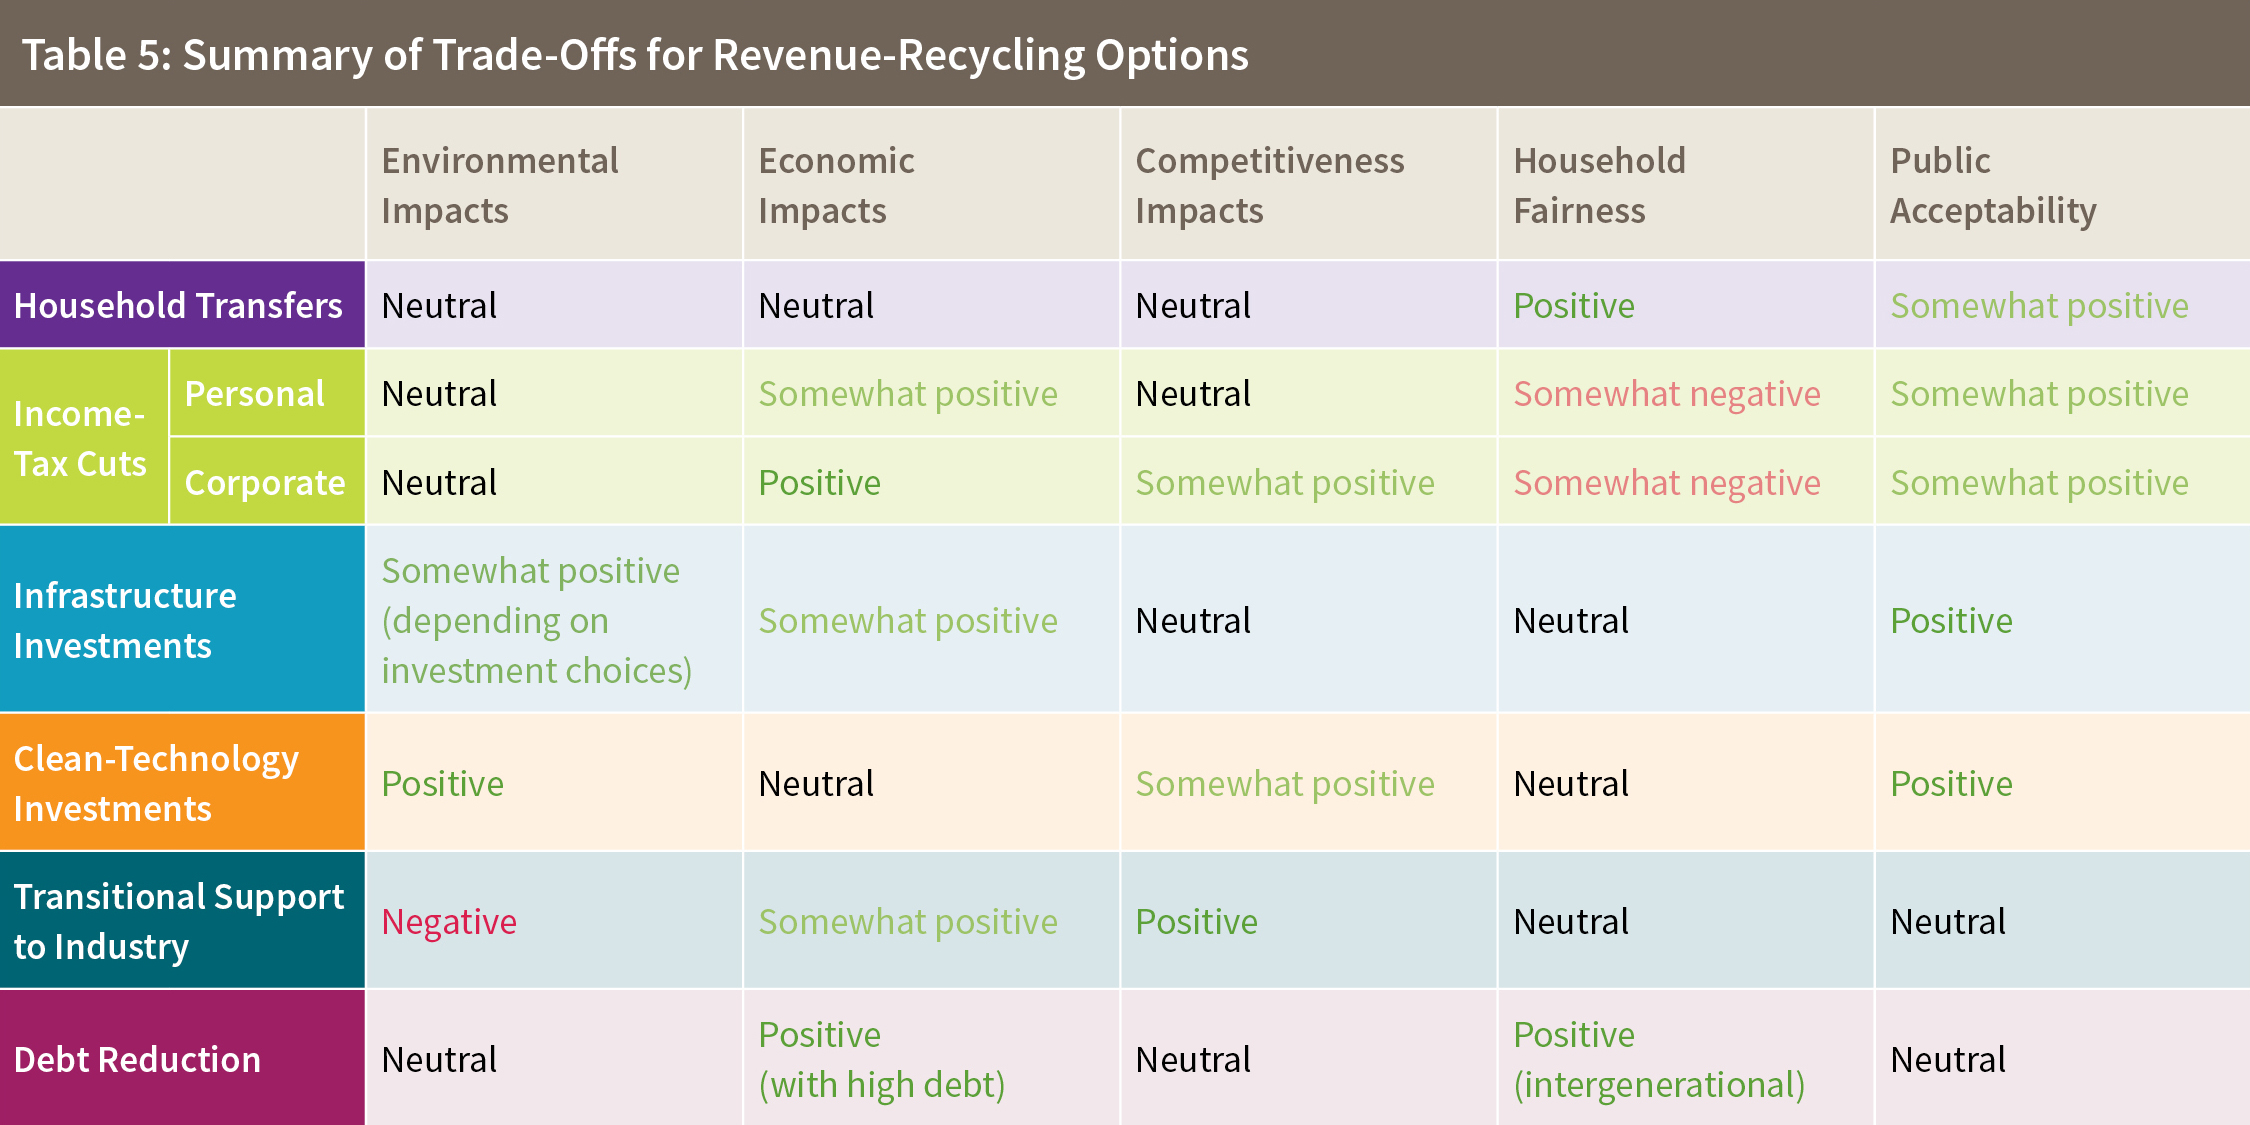 Table 5: Summary of Trade-Offs for Revenue-Recycling Options